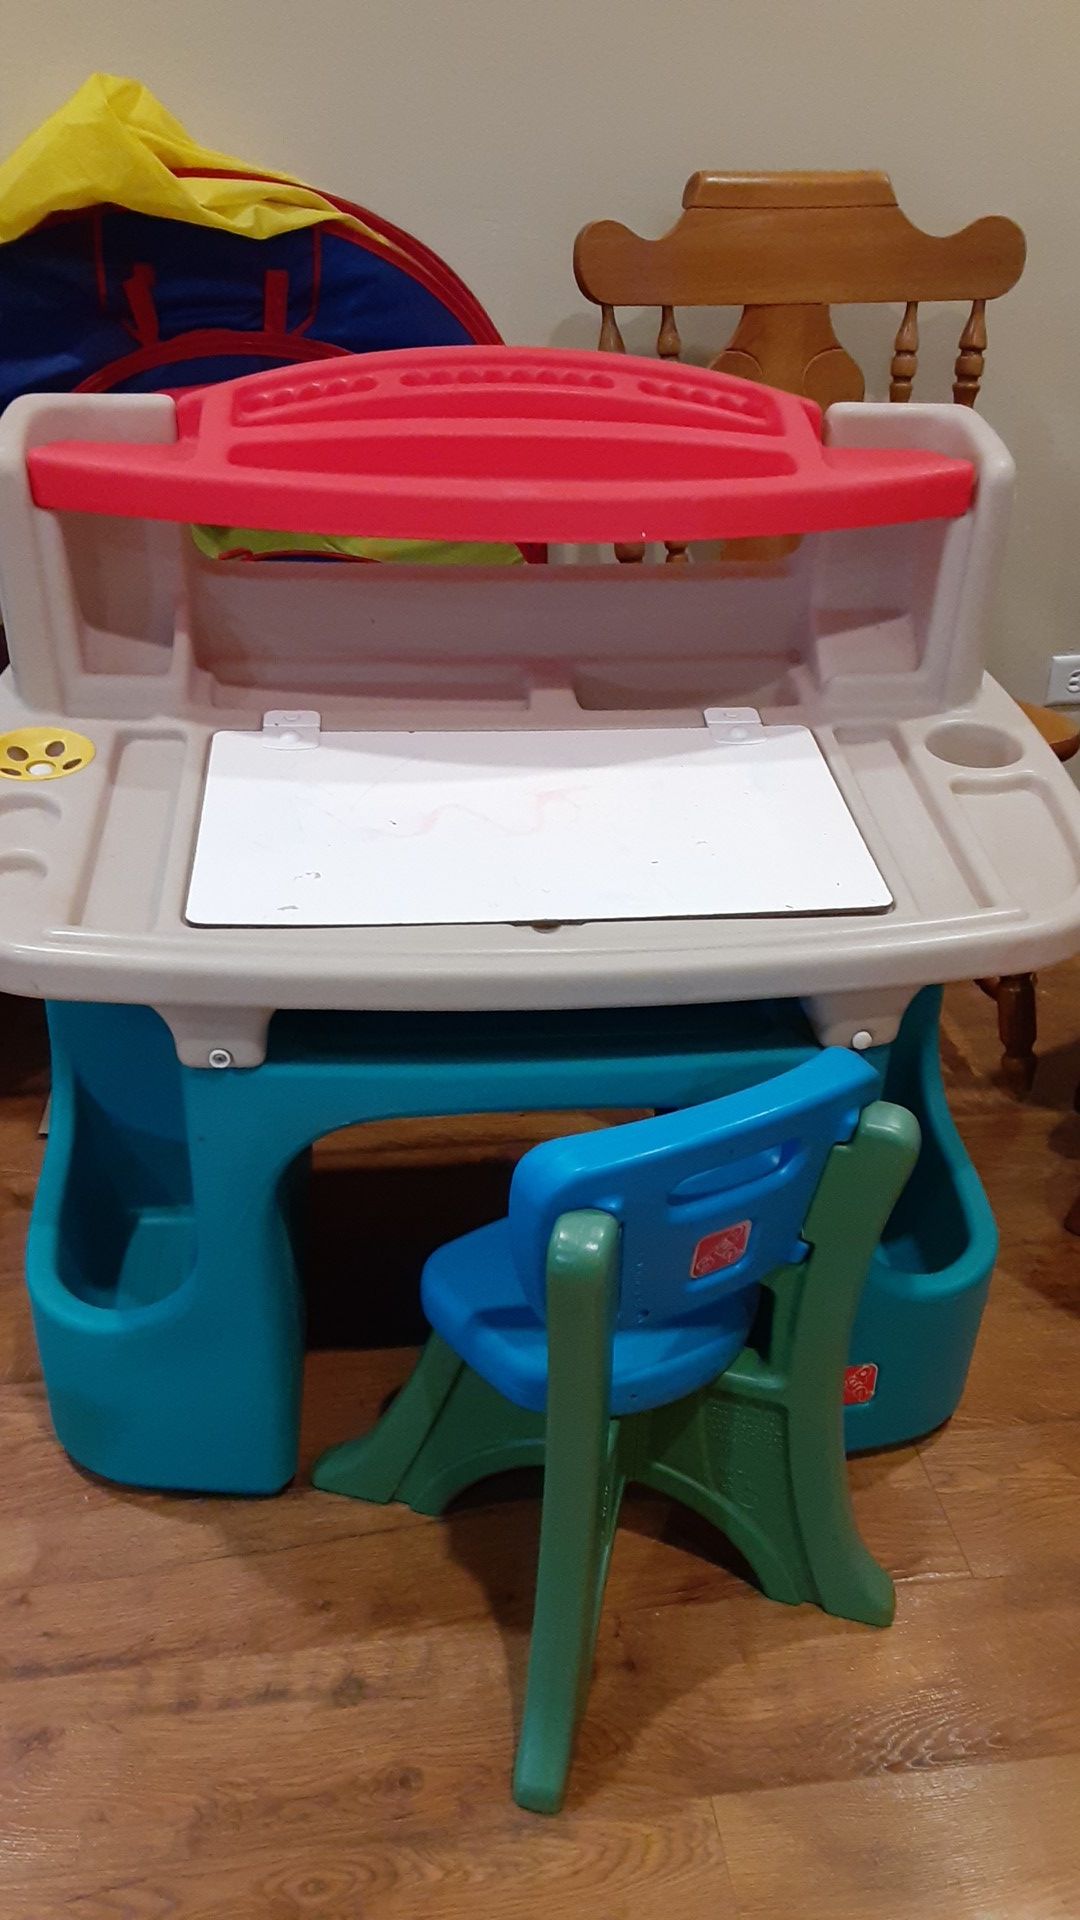 Kids desk and chair